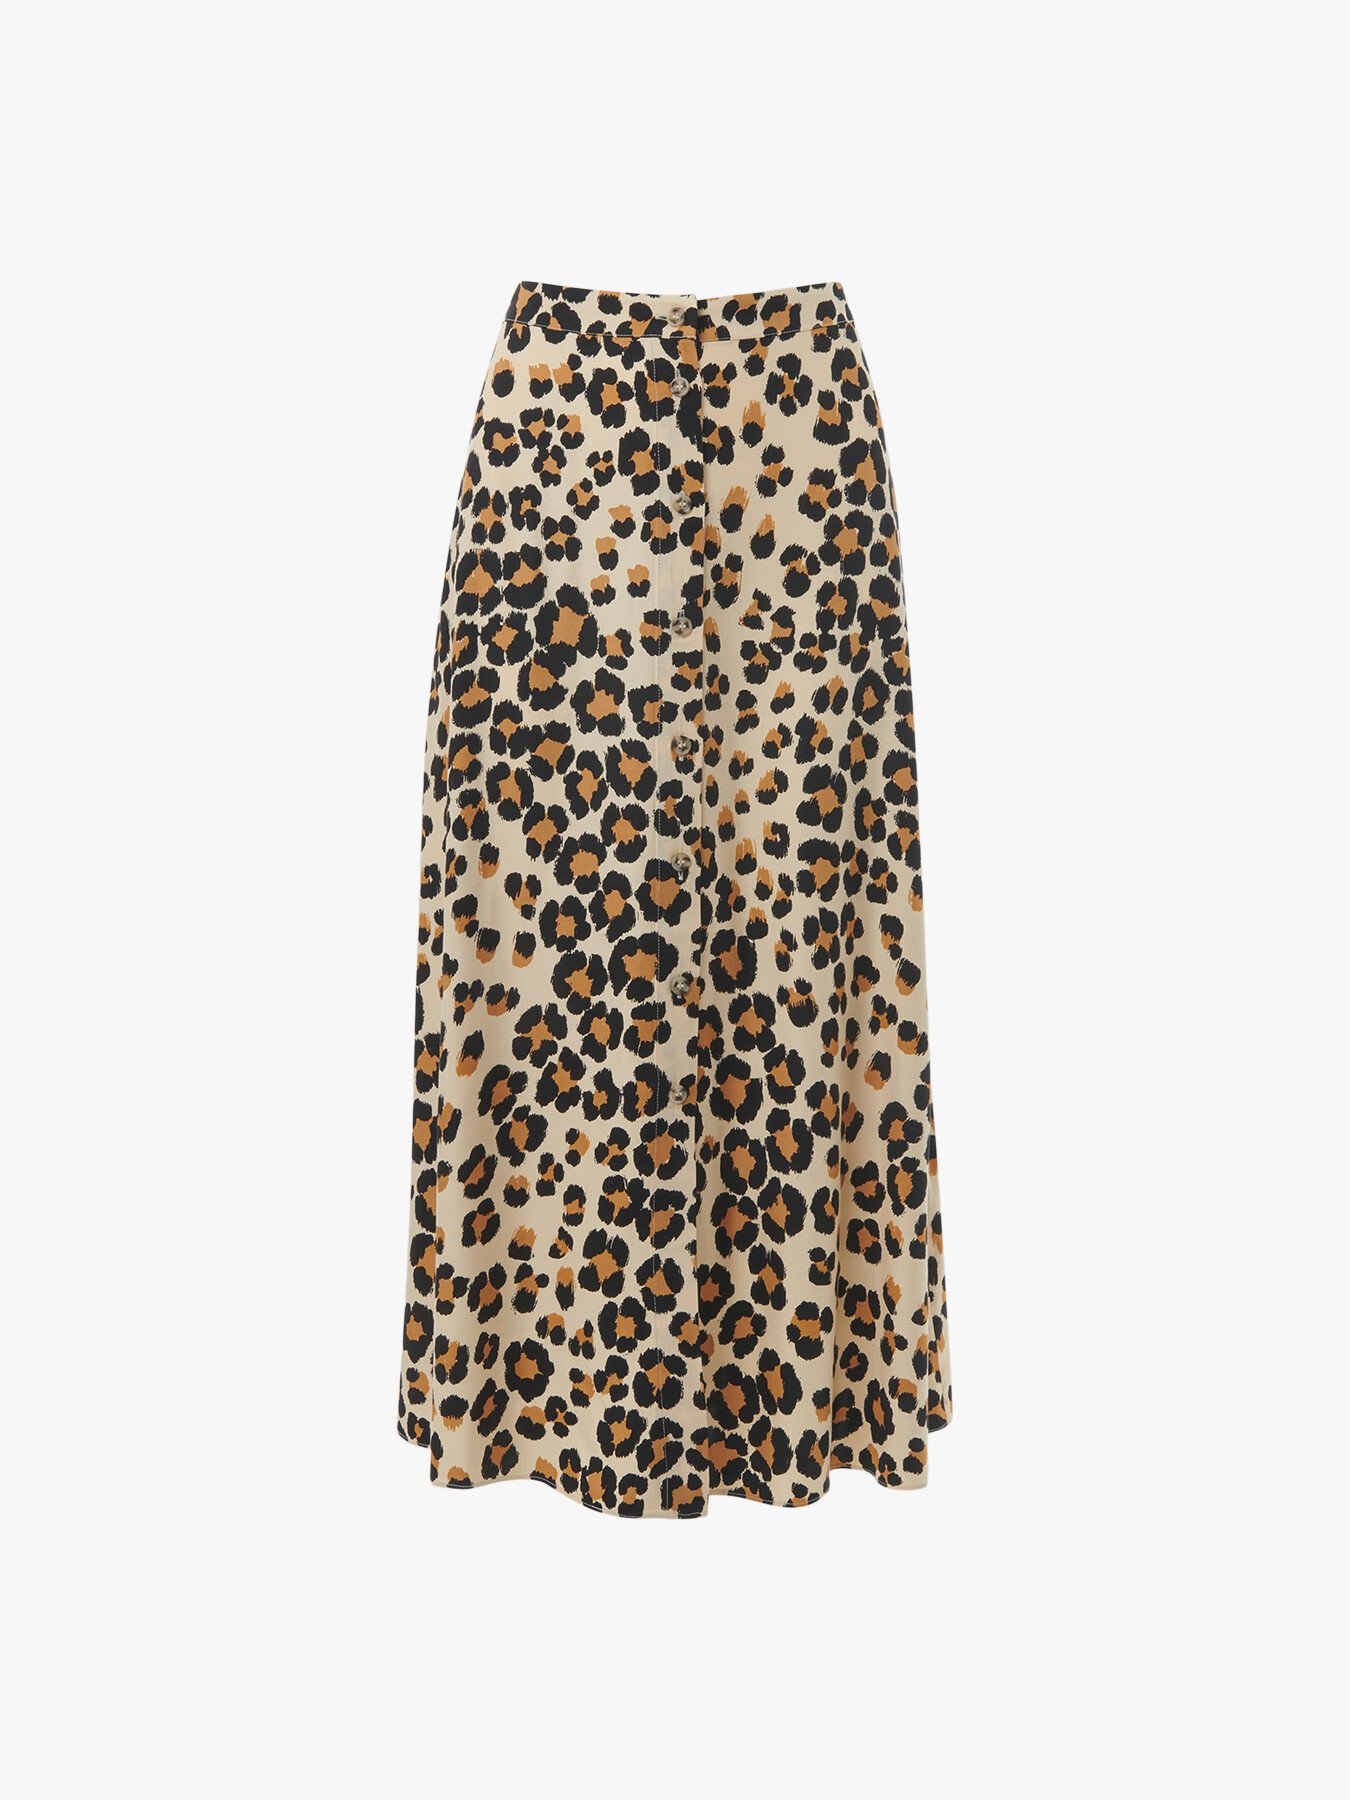 Whistles Painted Leopard Button Skirt In Leopard Print